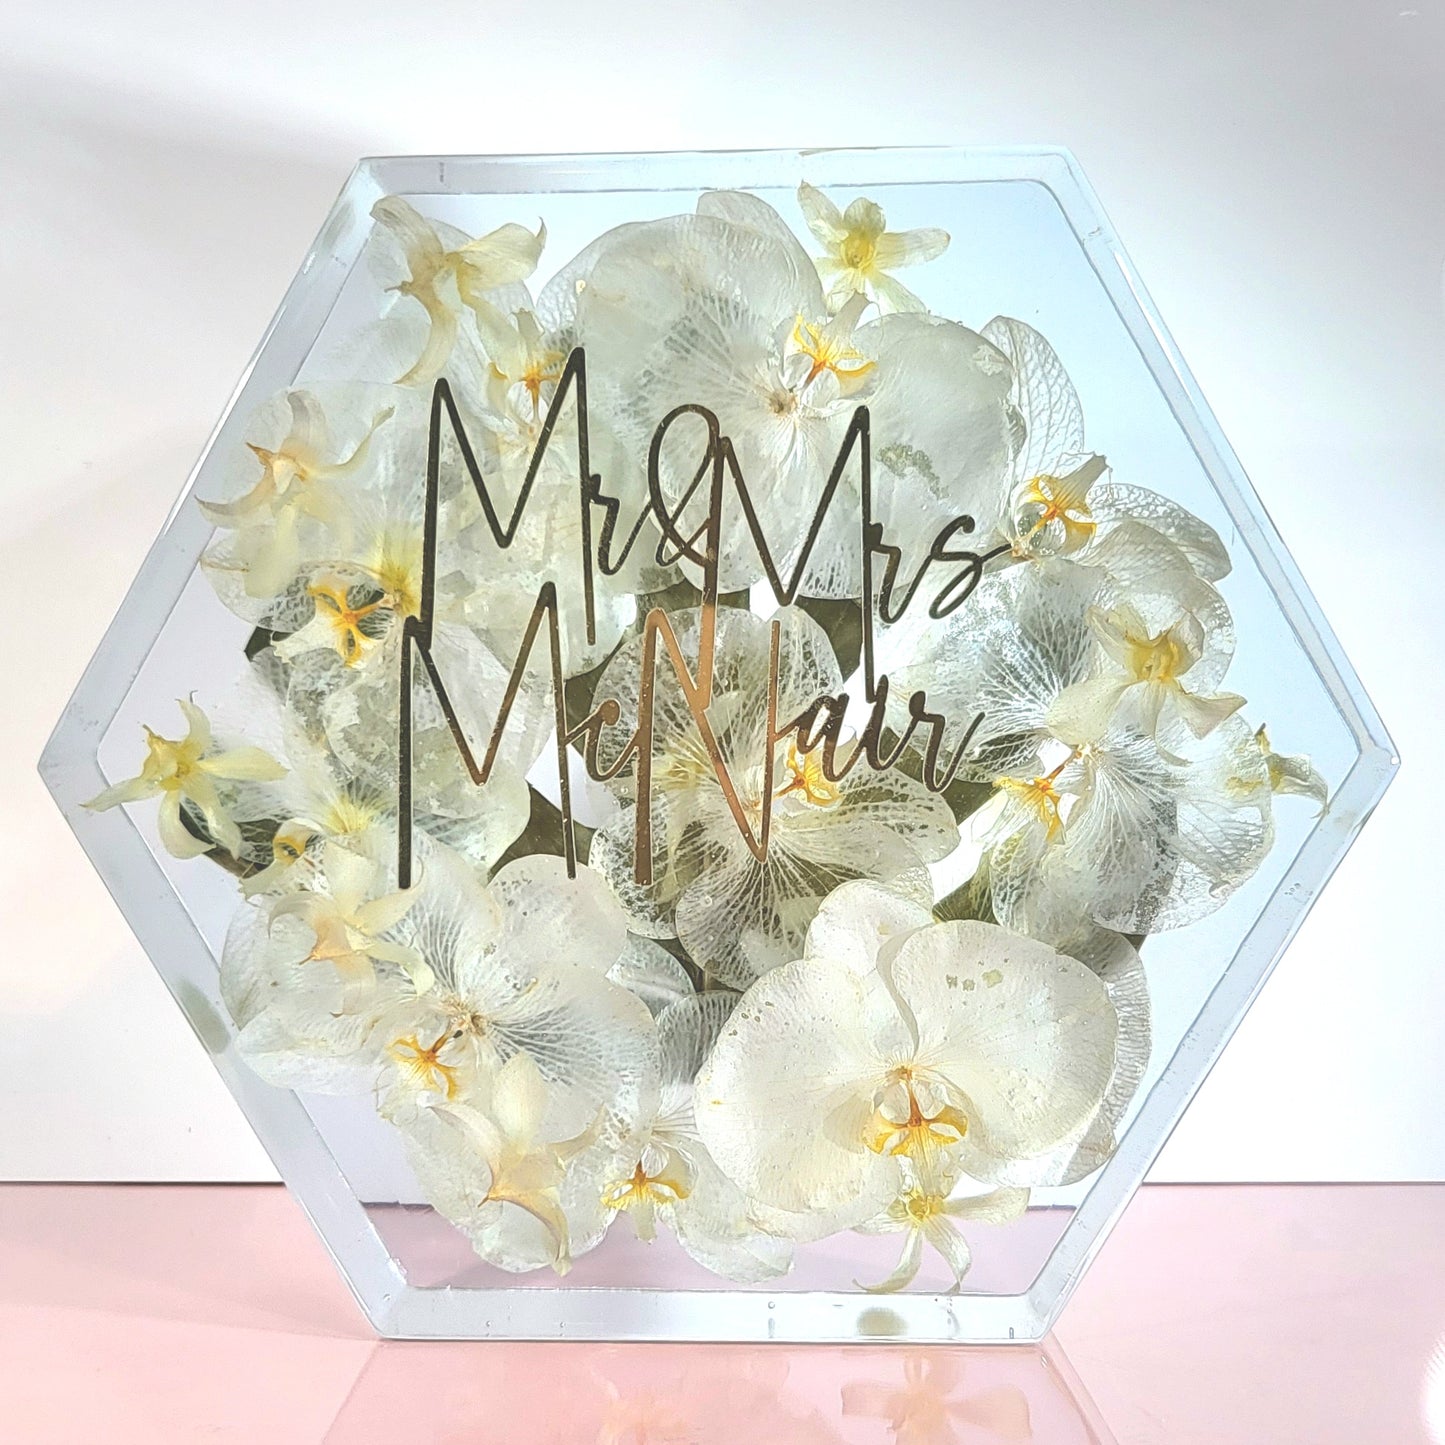 Large Orchid 12" Hexagon 3D Resin Wedding Bouquet Preservation Floral Gift Keepsake Save Your Wedding Flowers Forever - flofloflowery